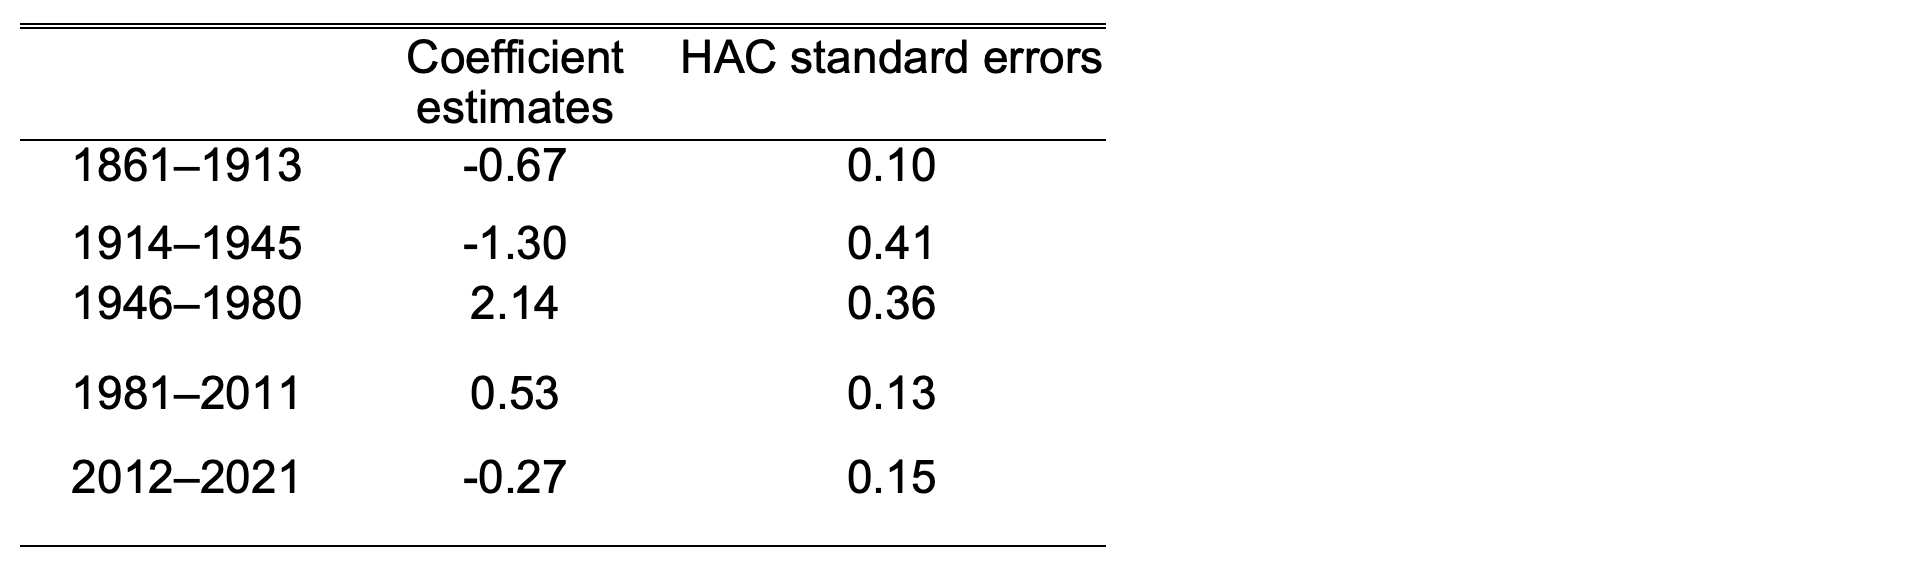 Table A1 Sub-period estimates of the unemployment rate coefficients from wage inflation regressions, with heteroscedasticity and autocorrelation consistent (HAC) standard errors